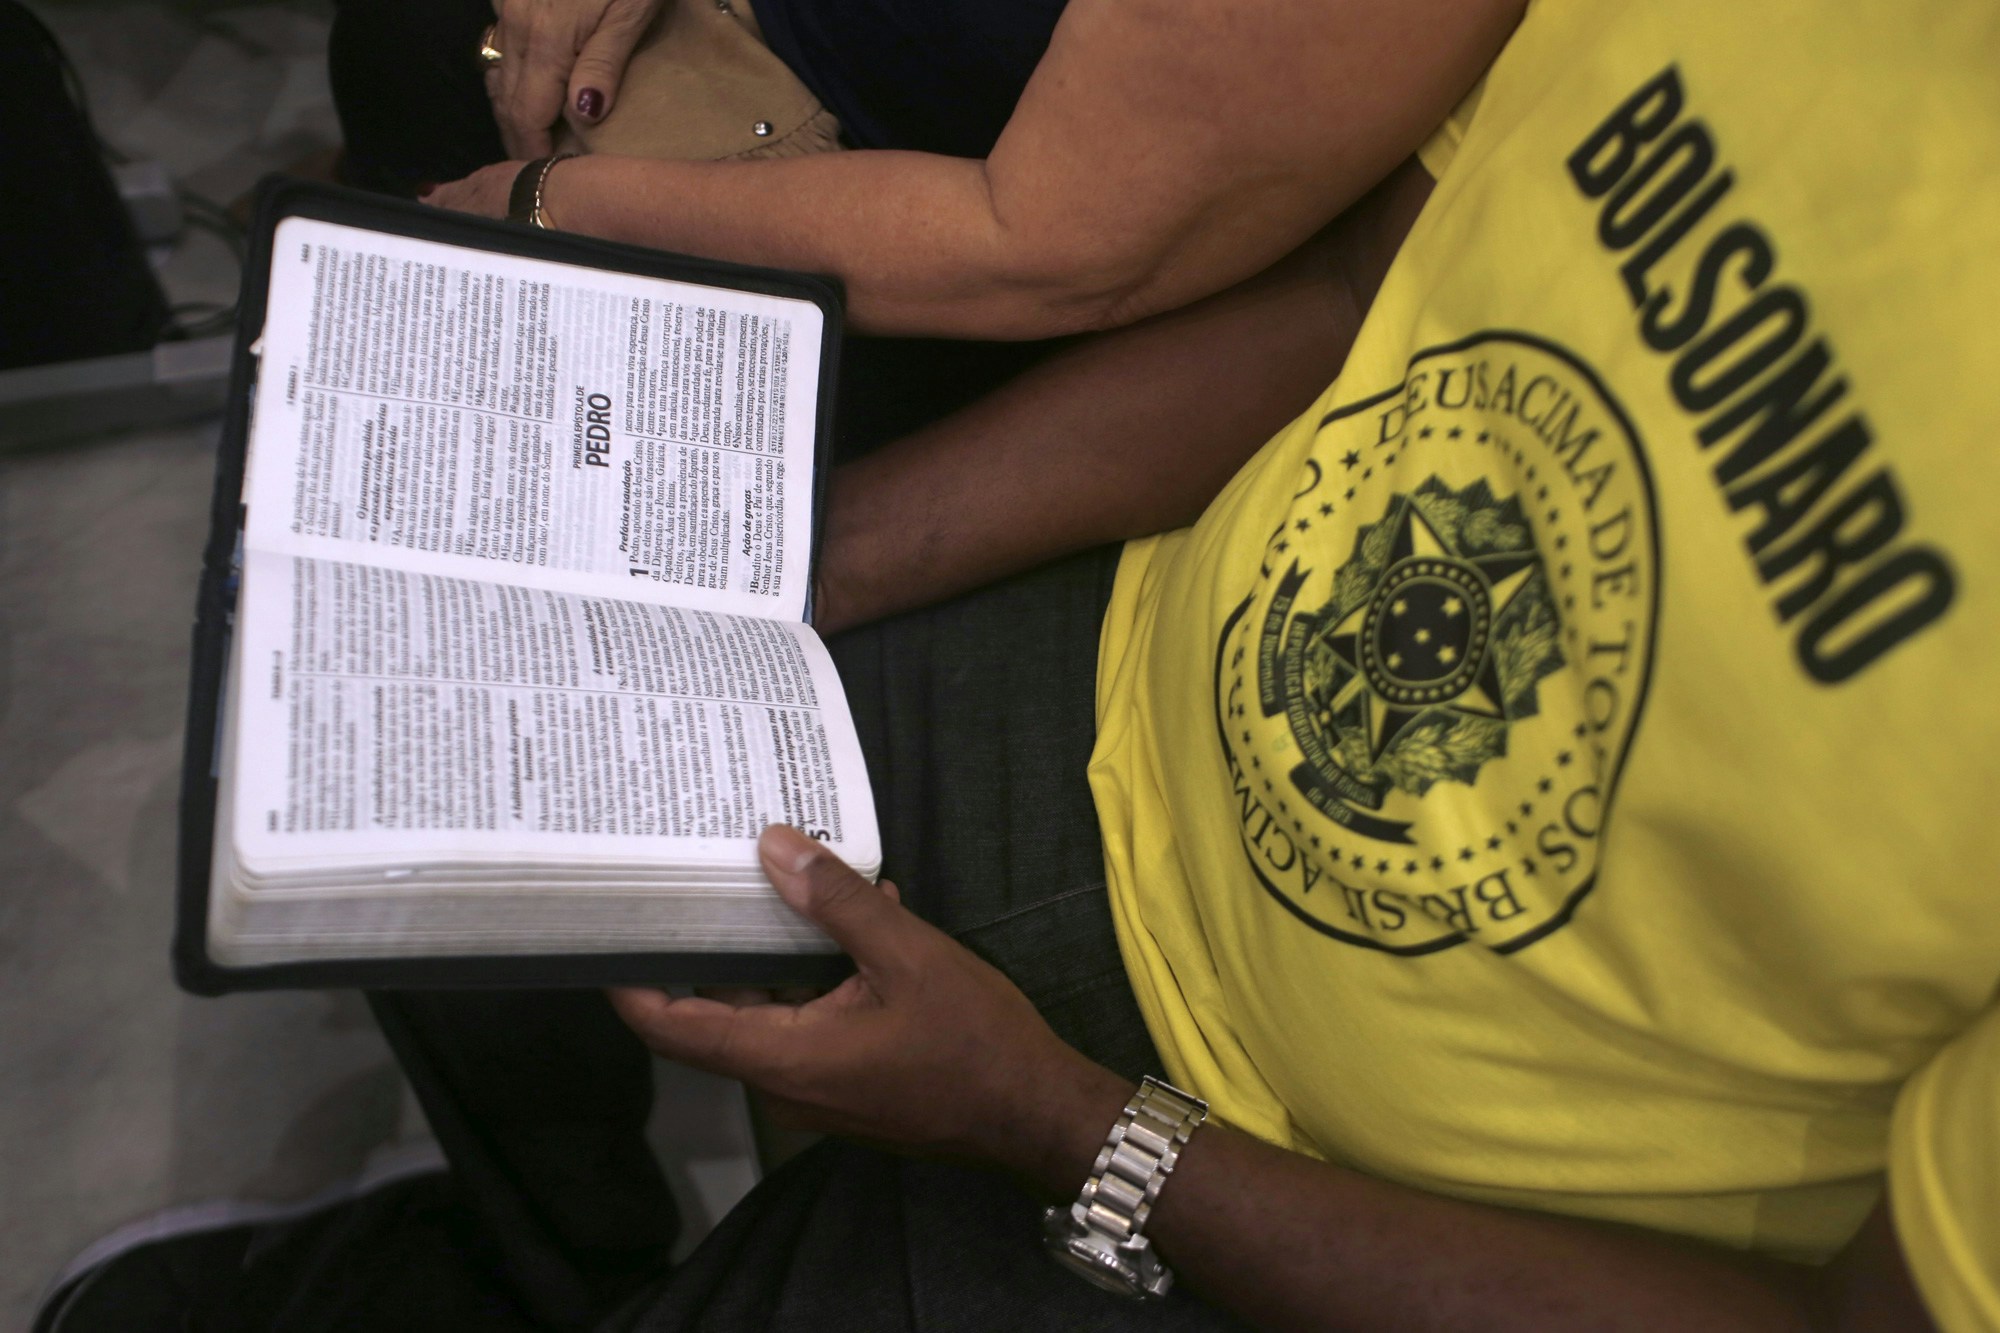 18 October 2018, Brazil, Rio de Janeiro: A man with a T-shirt with the inscription "Bolsonaro" reads the Bible during the last evangelical mass before the election in Brazil. Bolsonaro is receiving an additional boost from the evangelical movements in Brazil, which support his conservative agenda. Photo: Ian Cheibub/dpa (Photo by Ian Cheibub/picture alliance via Getty Images)